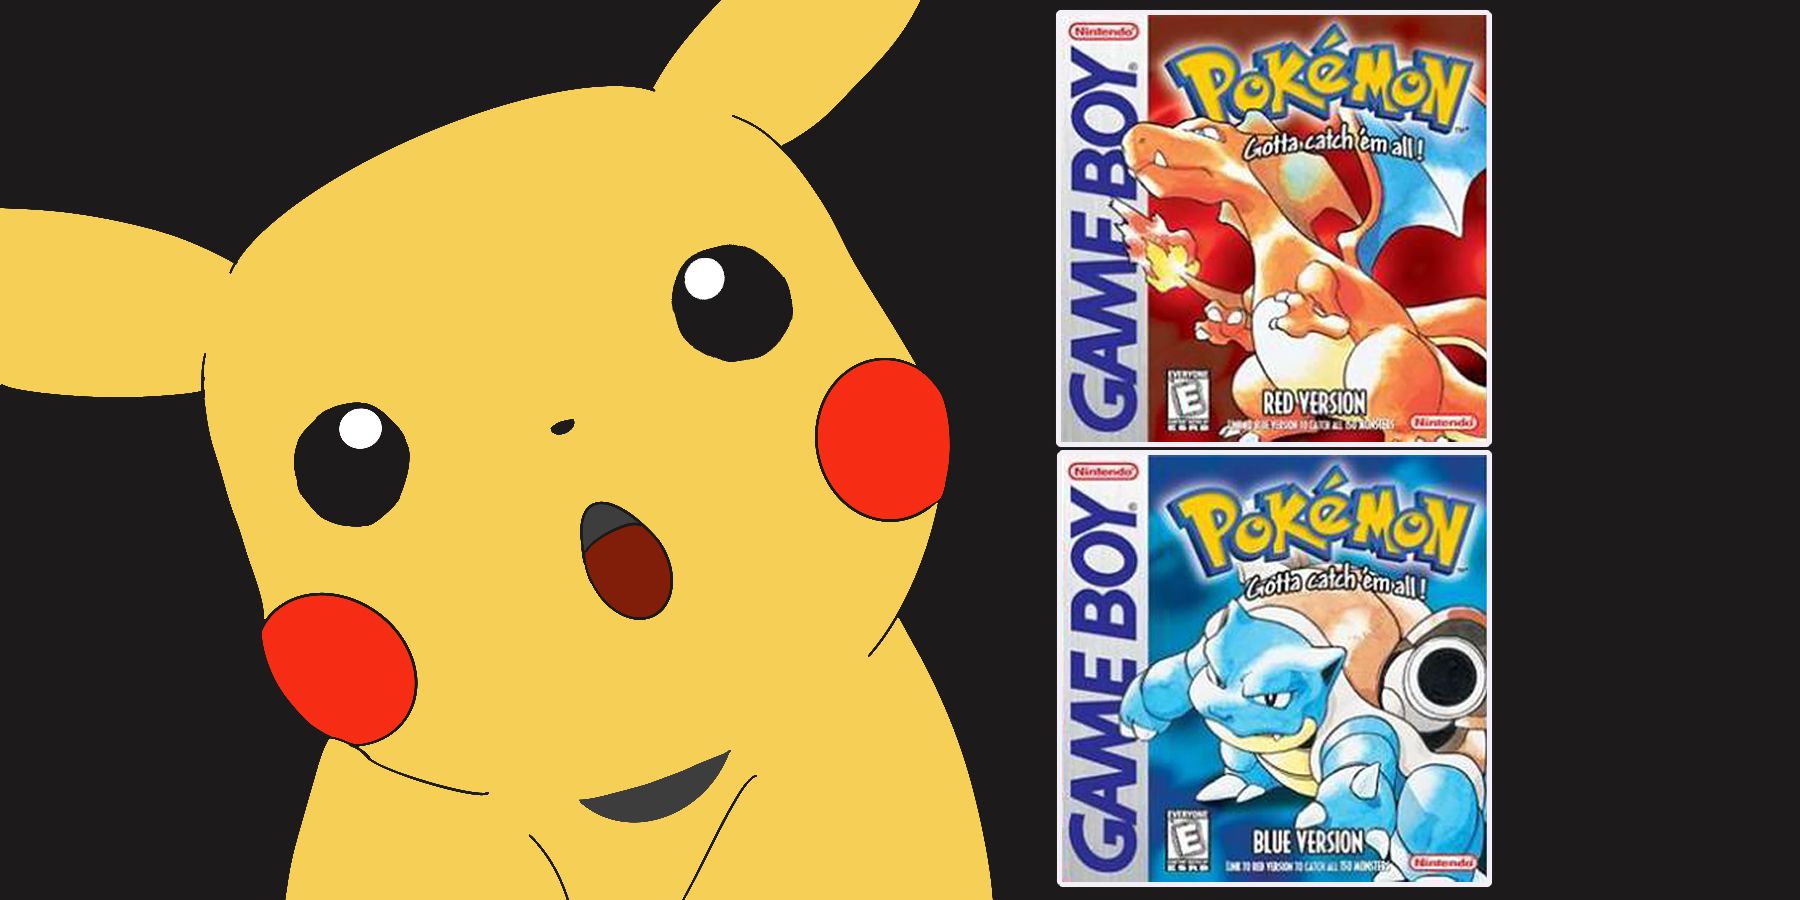 Amazed Pikachu looking at Pokemon Red and Blue Game Boy covers